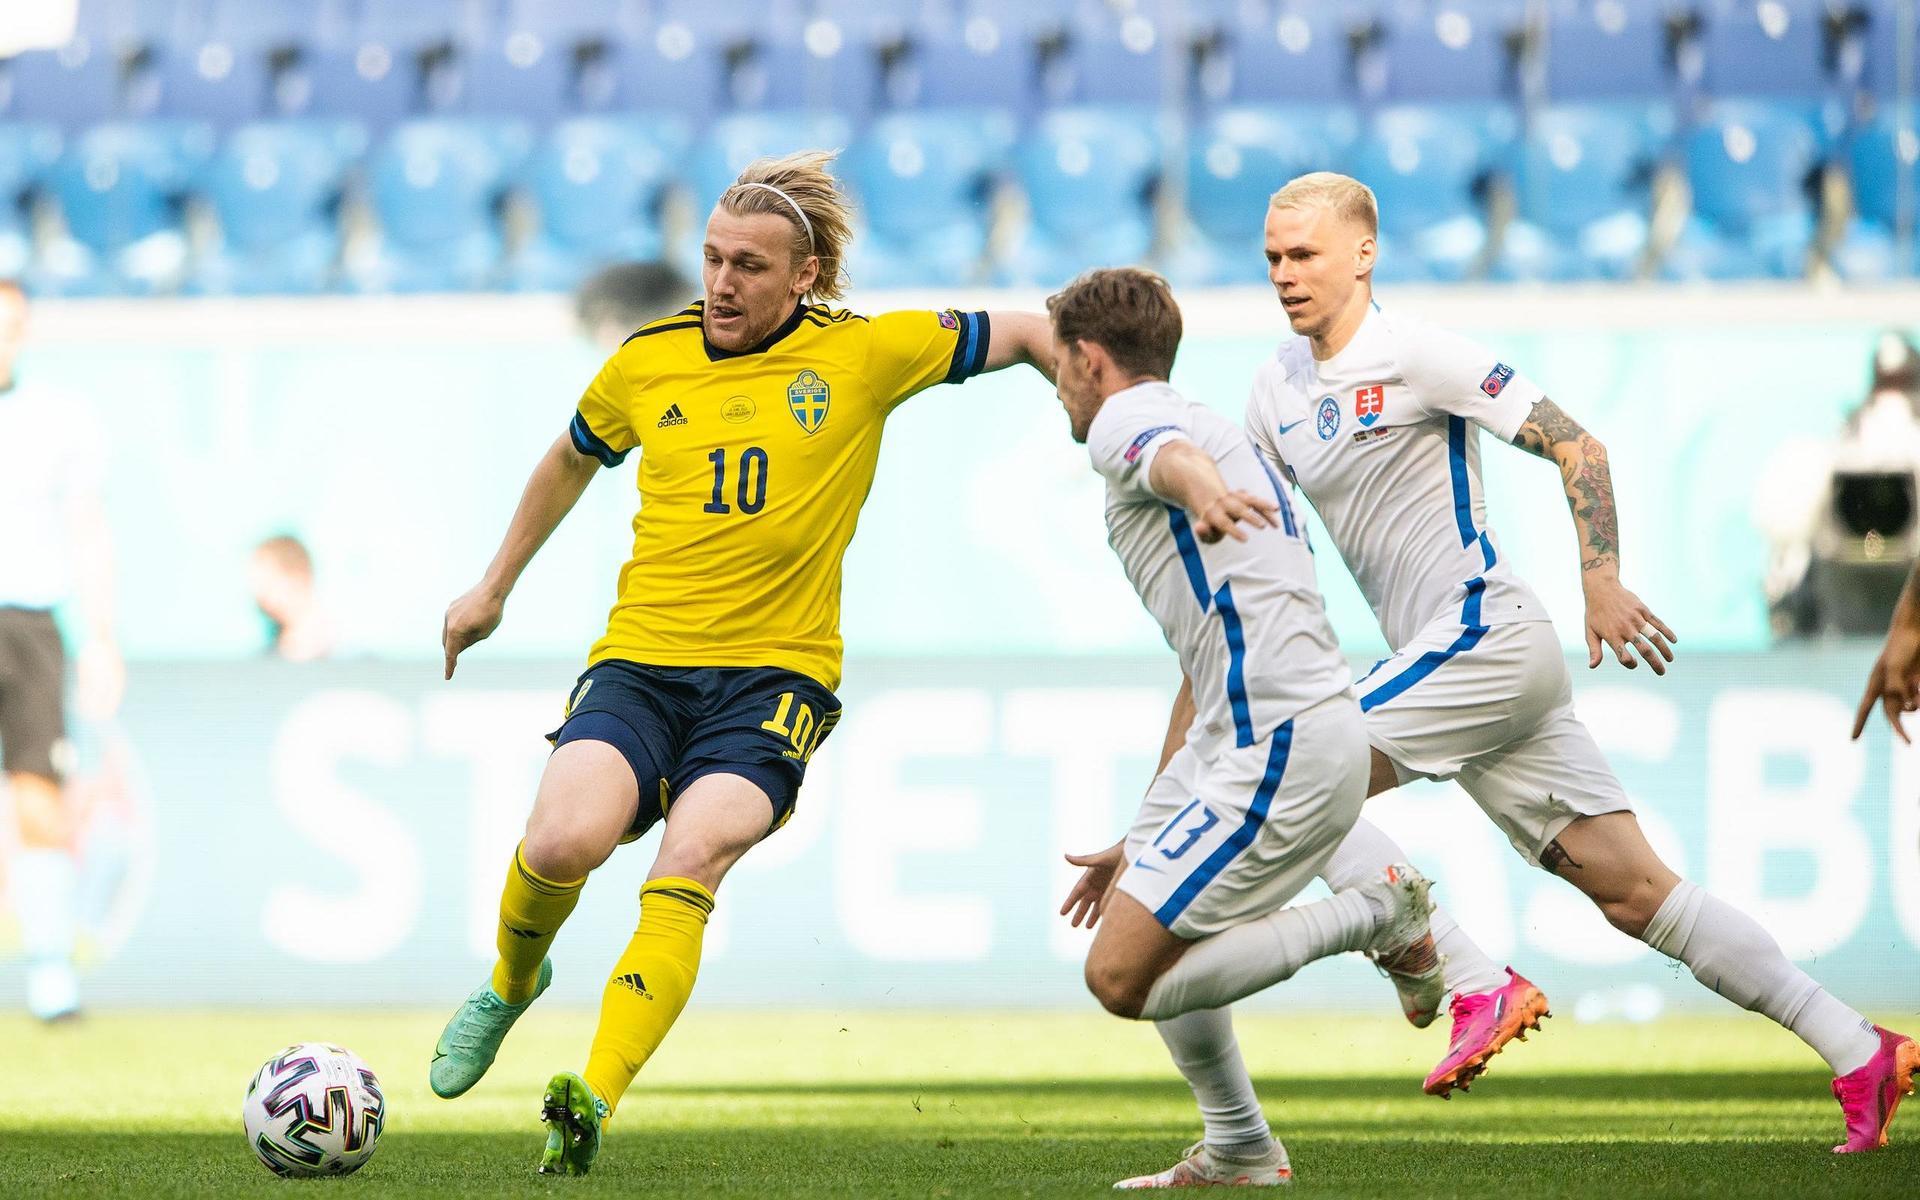 Emil Forsberg of Sweden and Patrik Hrosovsky of Slovakia during the UEFA Euro 2020 Football Championship match between Sweden and Slovakia on June 18, 2021 in Saint Petersburg. 